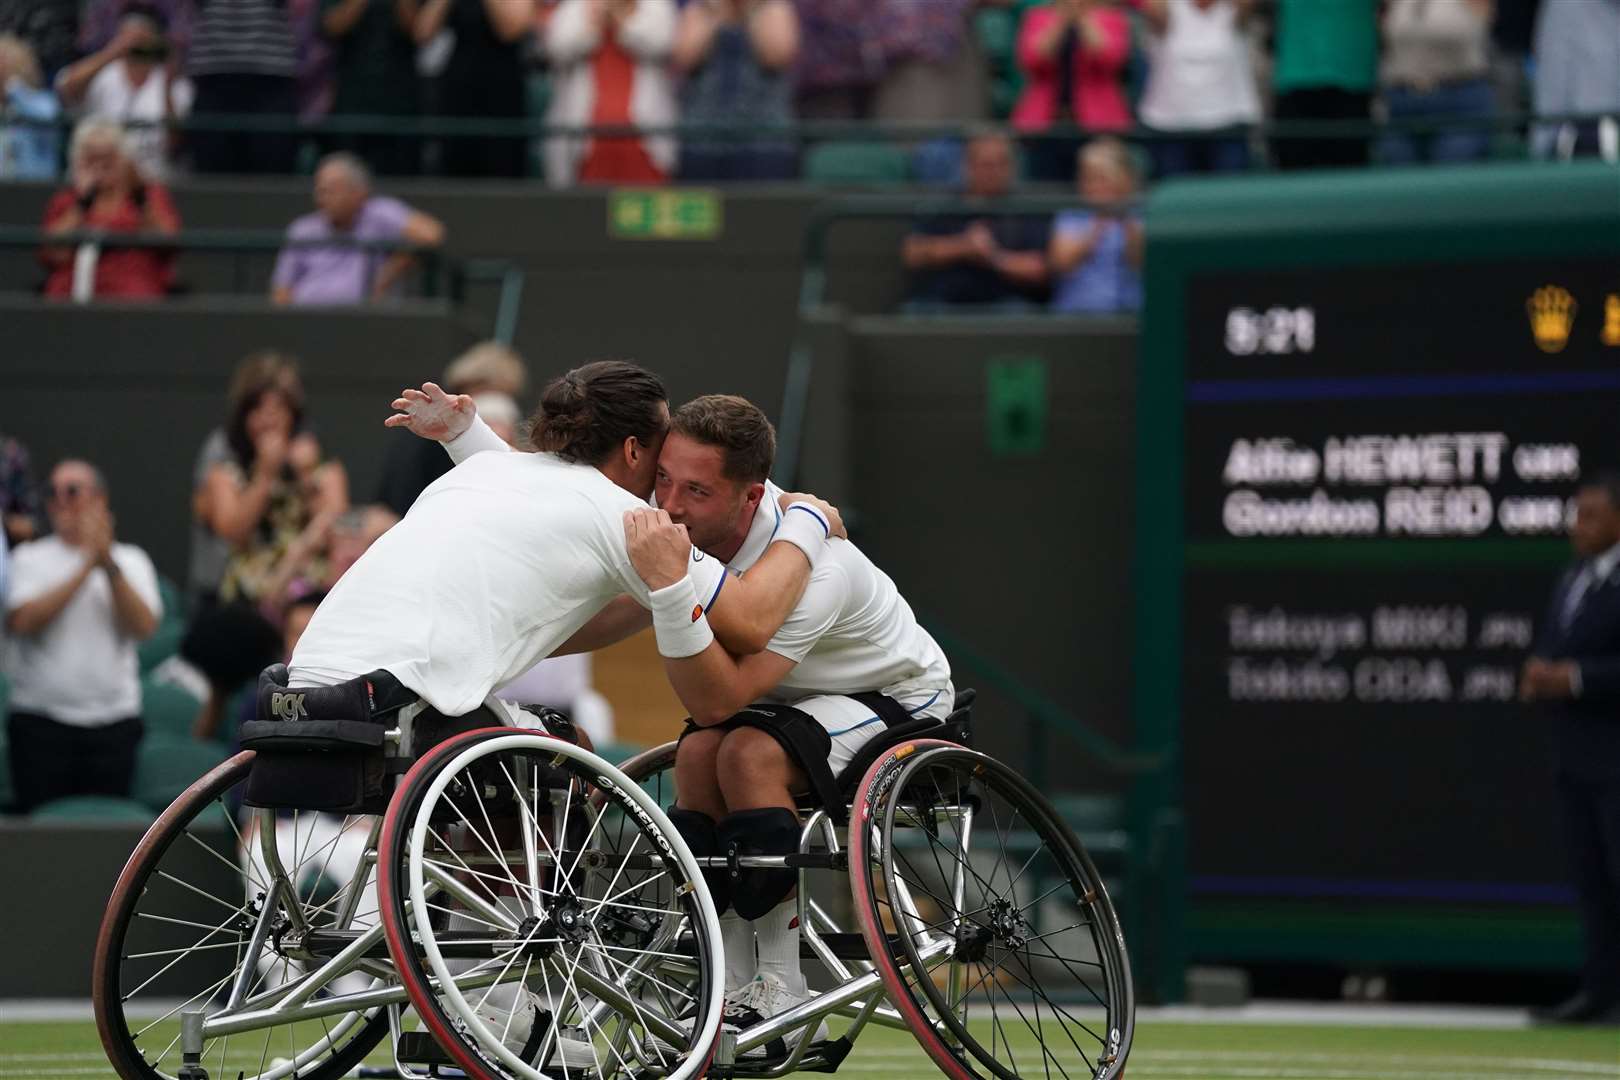 Alfie Hewett and Gordon Reid celebrate victory in the wheelchair doubles final (PA)